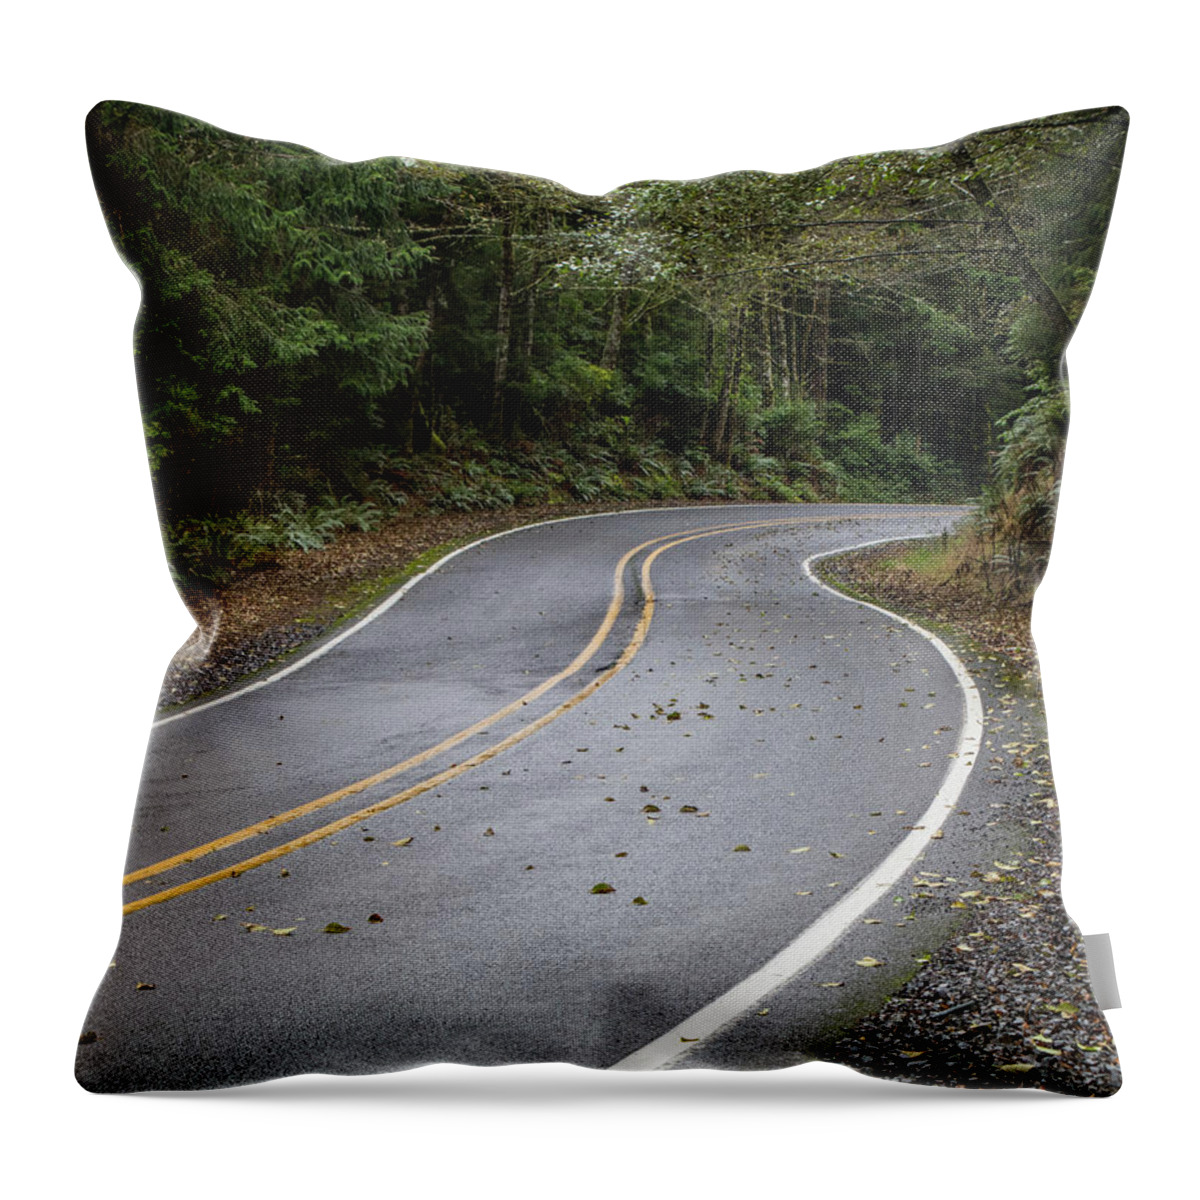 2018 Throw Pillow featuring the photograph The Road Ahead by Gerri Bigler